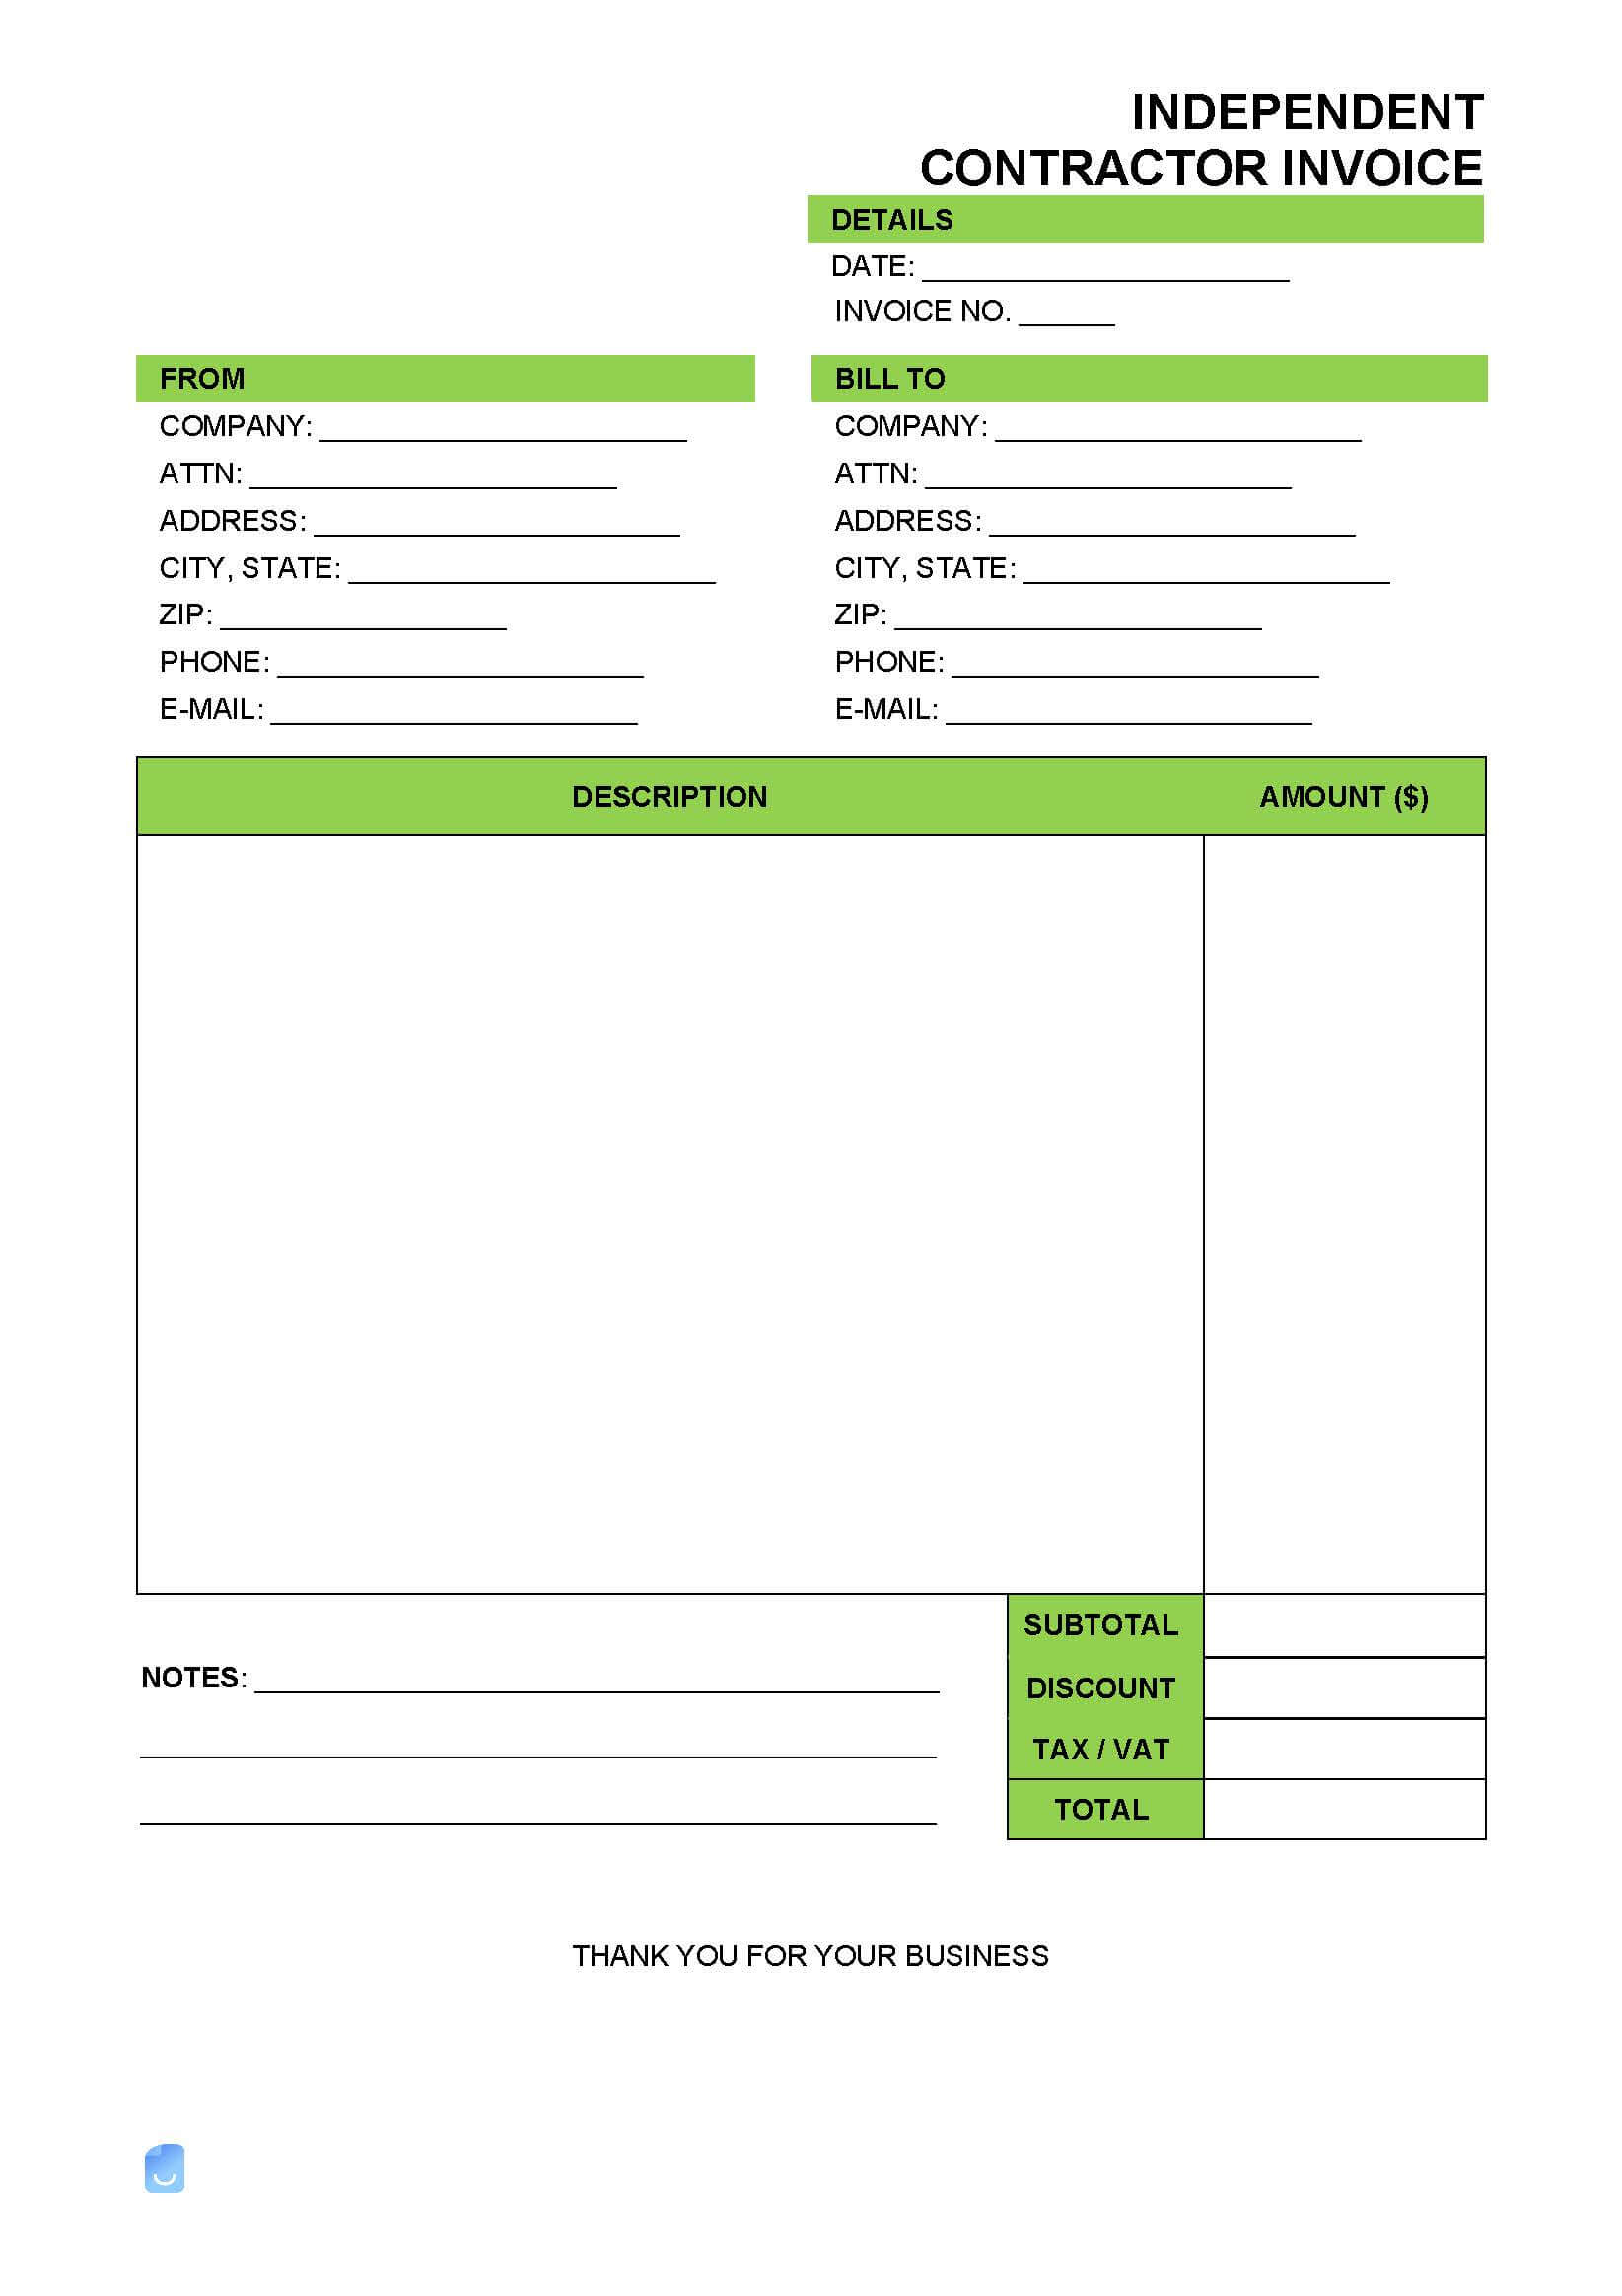 Independent Contractor (1099) Invoice Template | Invoice Maker With Regard To 1099 Invoice Template